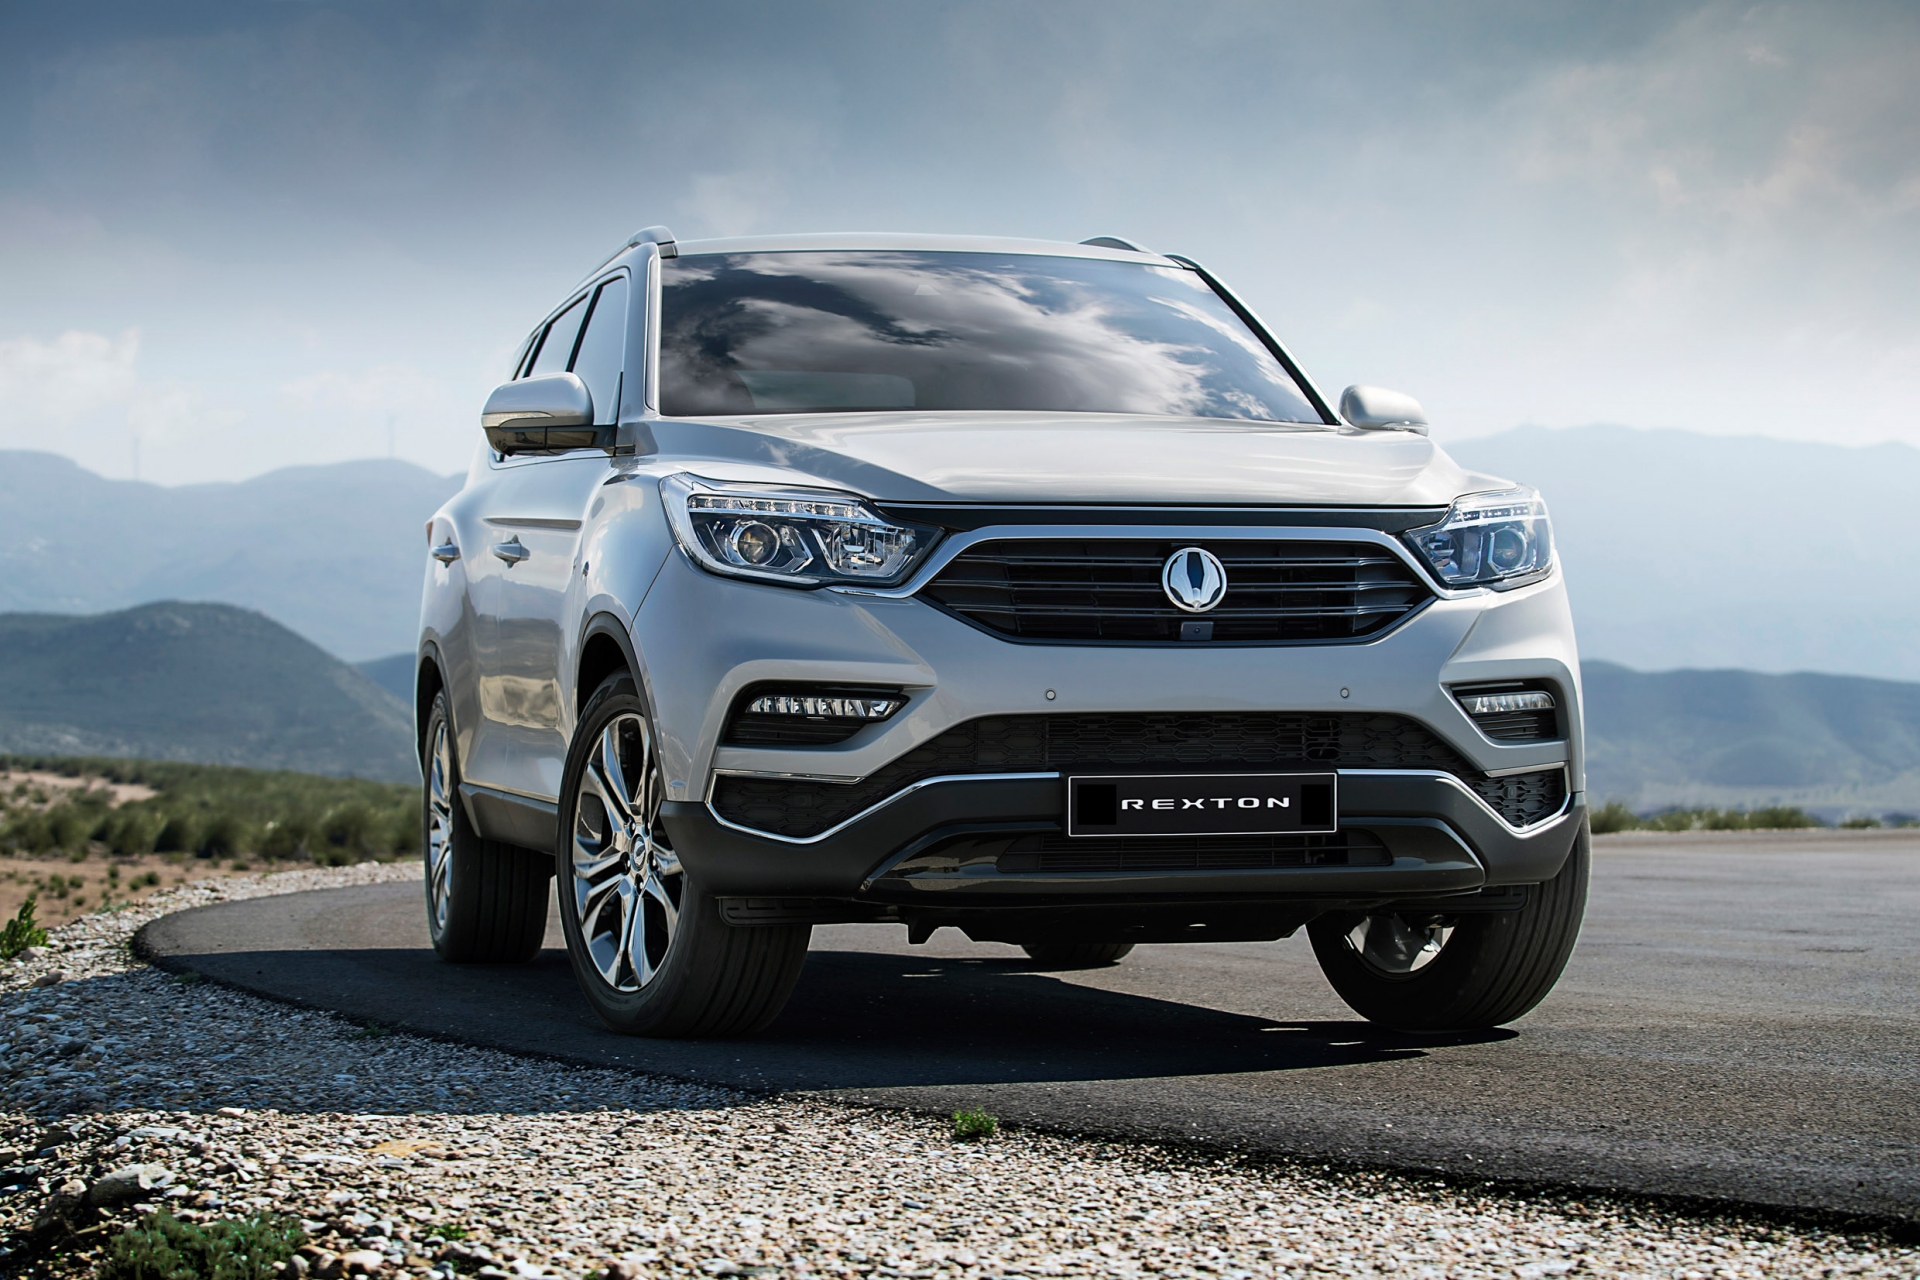 2018 Ssangyong Rexton - Silver Exterior - Front Side Quarter - Static